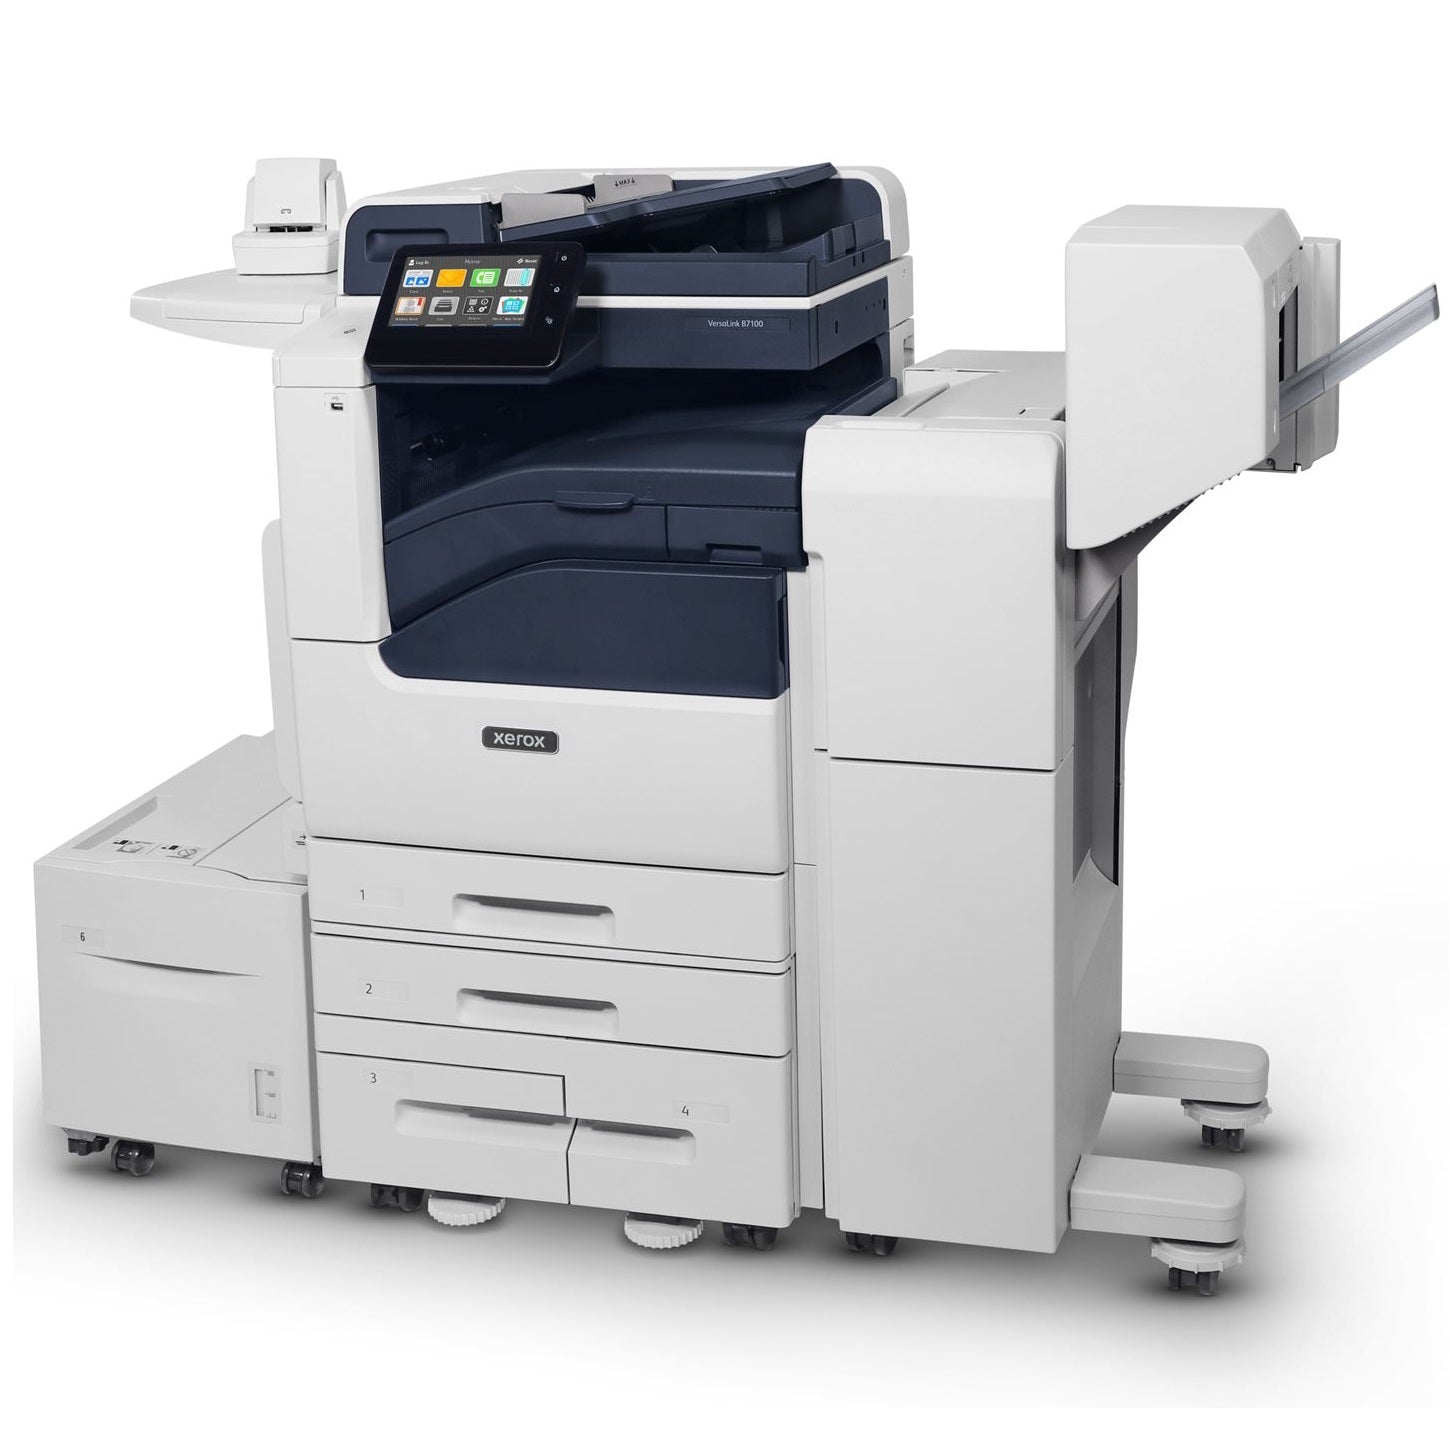 Absolute Toner Xerox VersaLink B7135 Monochrome Multifunction Laser Printer with 130 Sheet DADF, Duplex, Scan To Email, Security - Ideal For Small To Mid-Size Workgroups Printers/Copiers